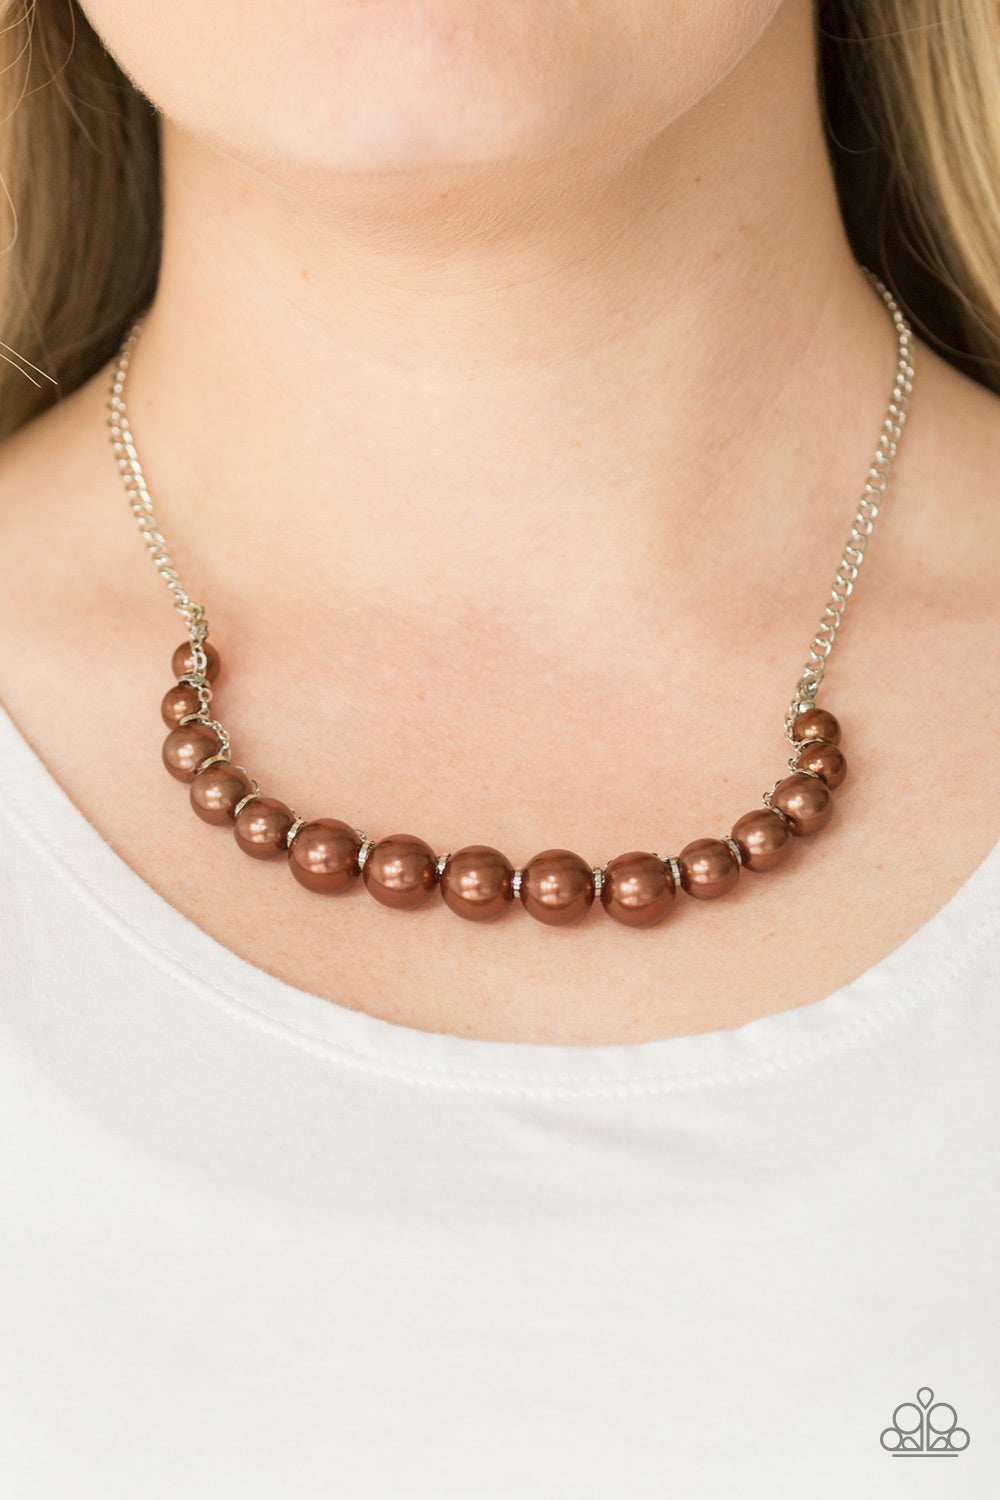 The Fashion Show Must Go On - Brown Pearl Necklace - Paparazzi Accessories - Paparazzi Accessories